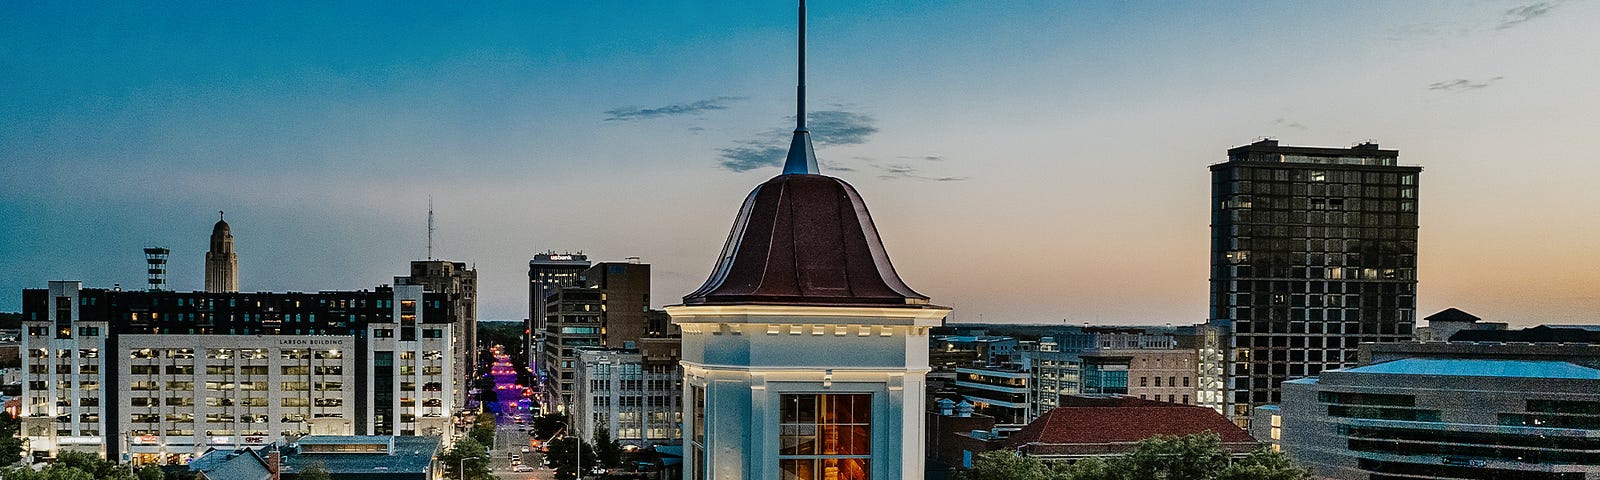 The sun sets on Lincoln with the Love Library cupola in the foreground and downtown Lincoln in the distance